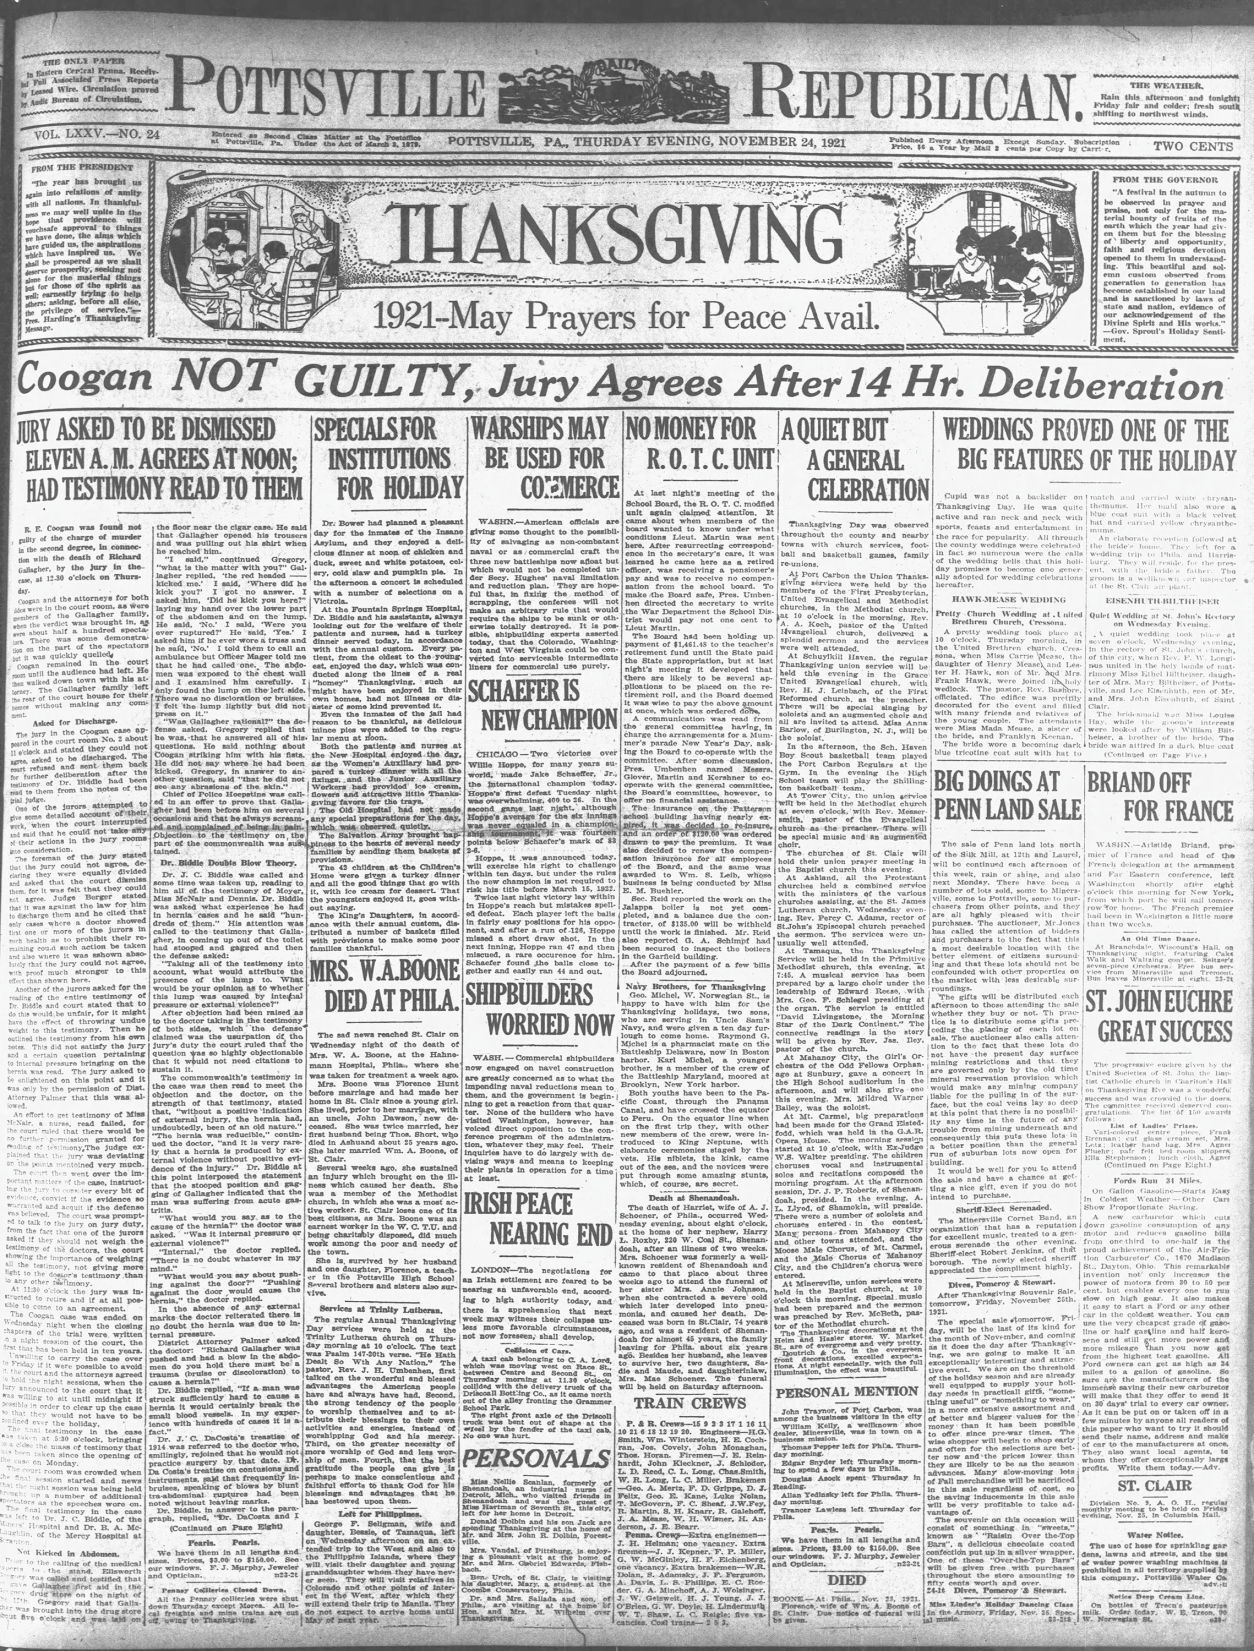 THANKSGIVING 100 YEARS AGO